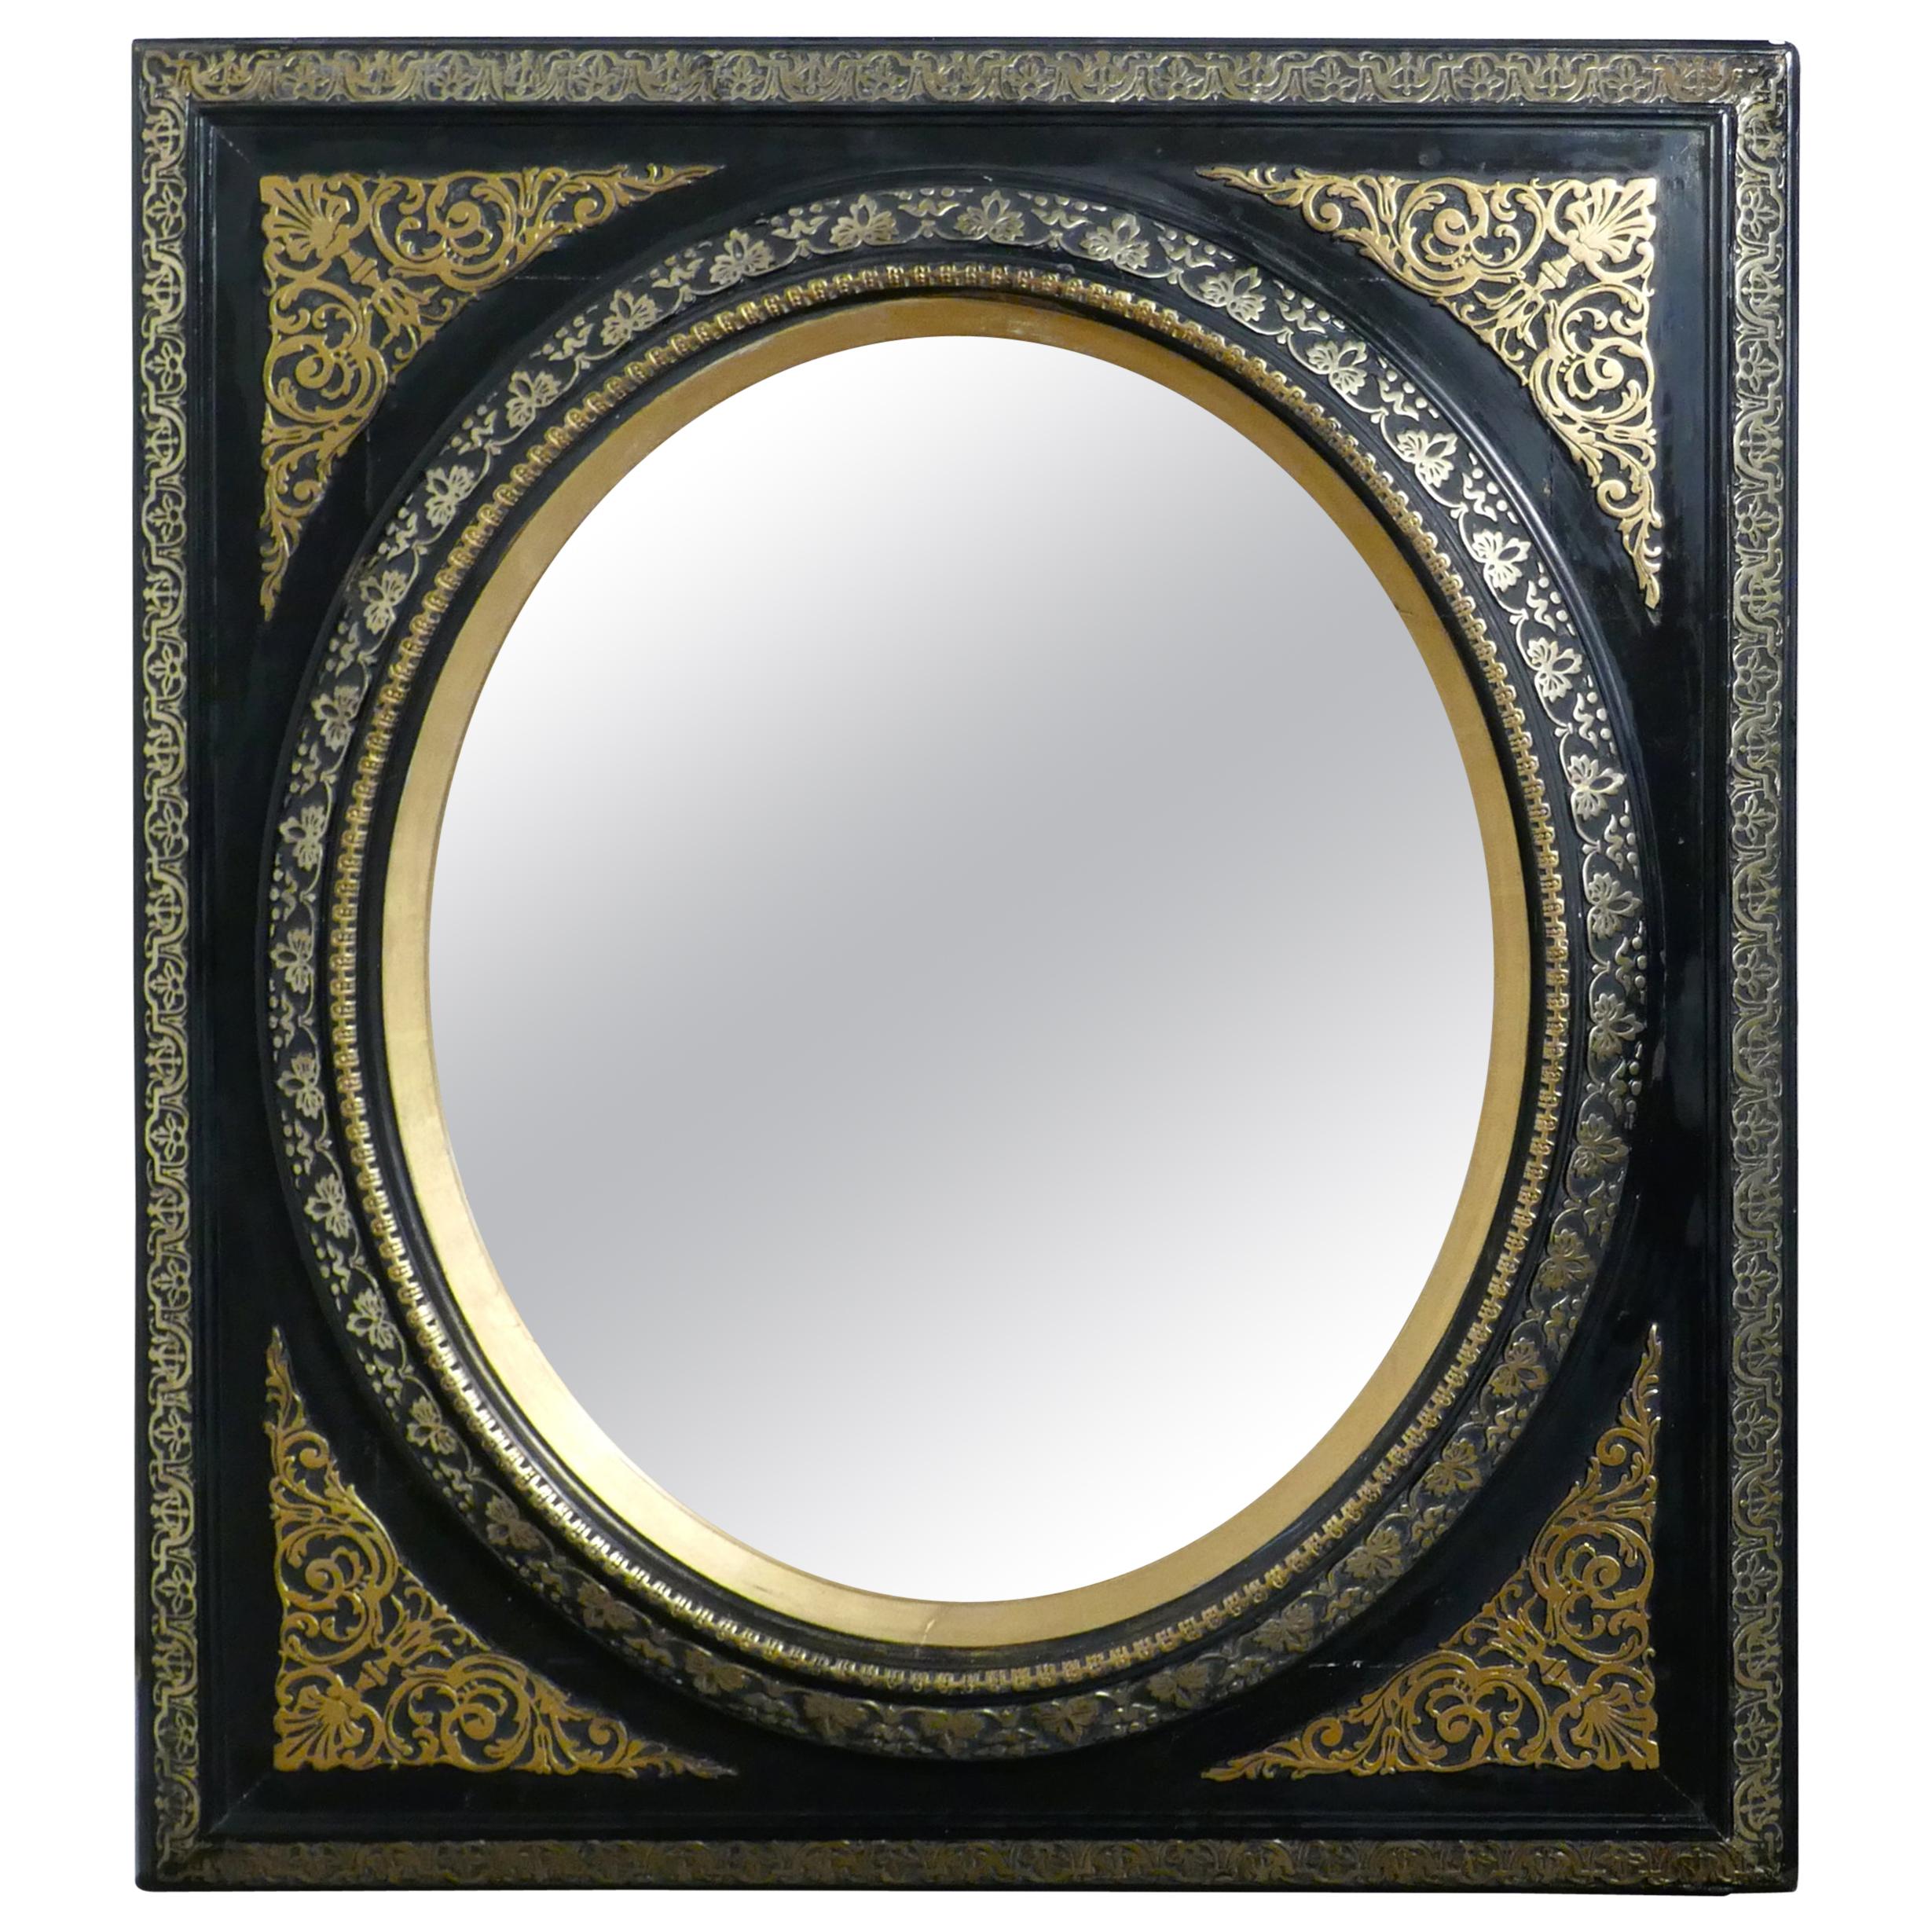 Stunning French Empire Gilt and Lacquer Wall Mirror